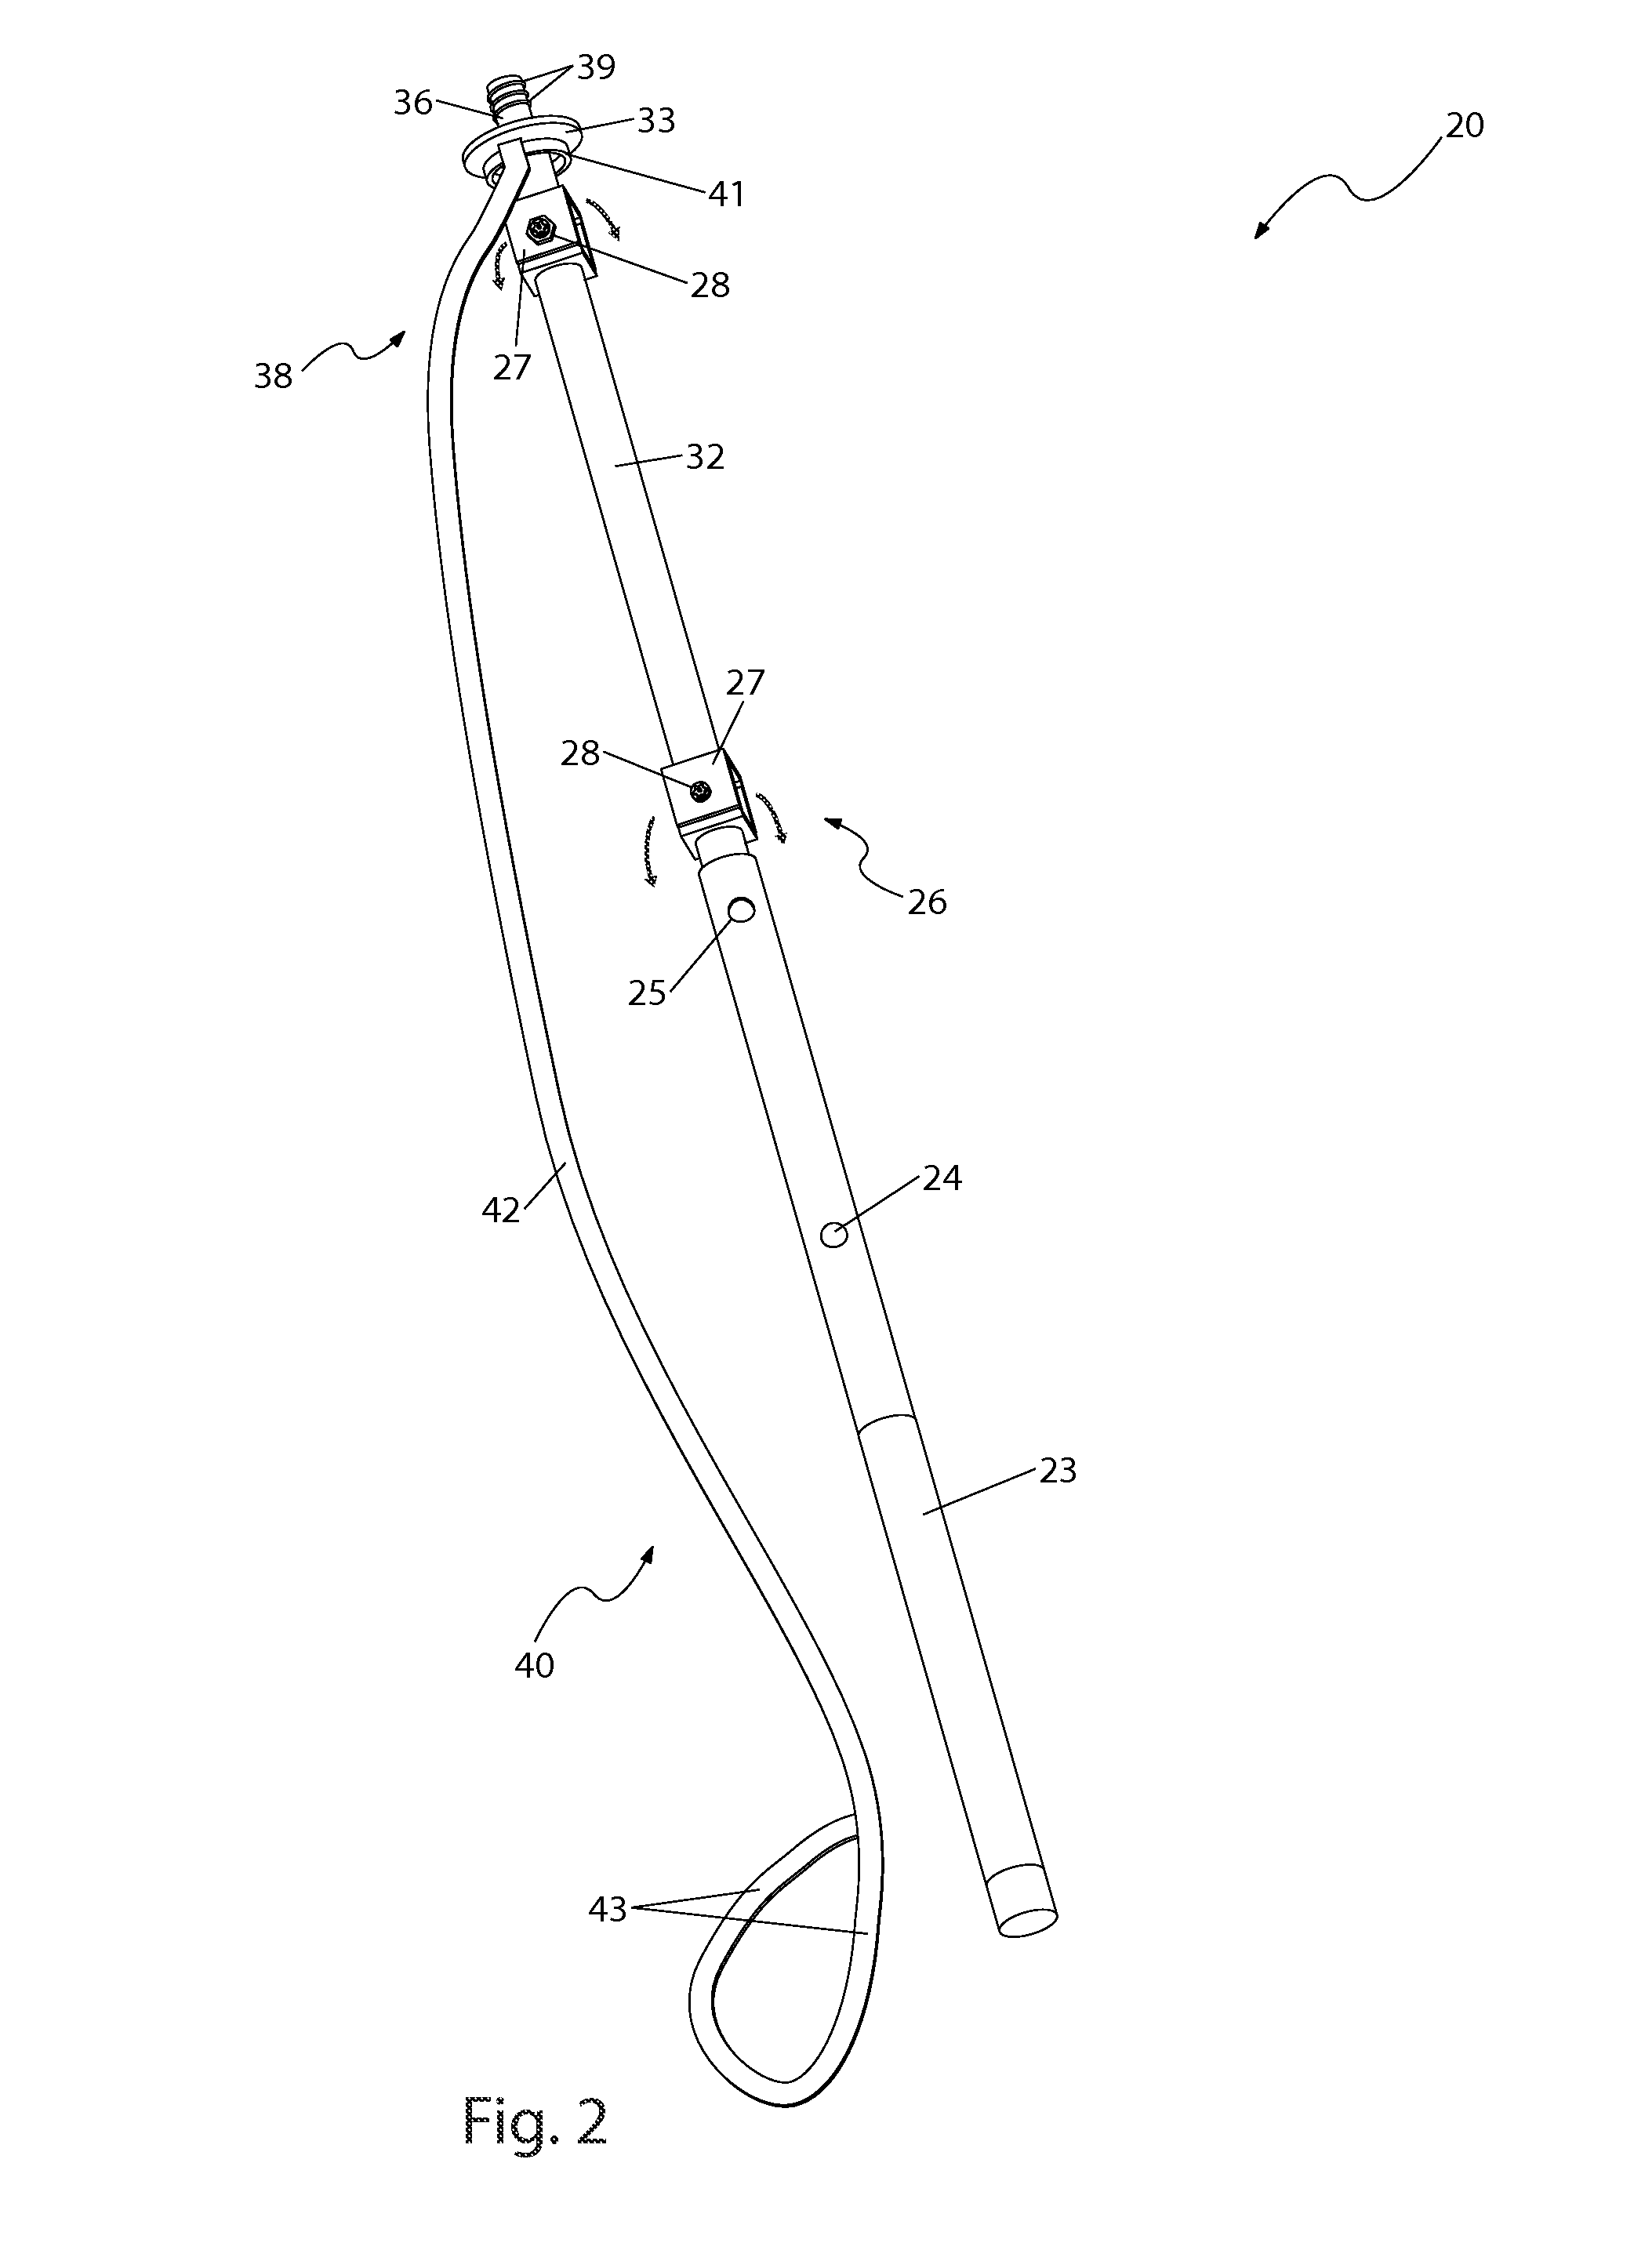 Window maintenance device for large vehicles